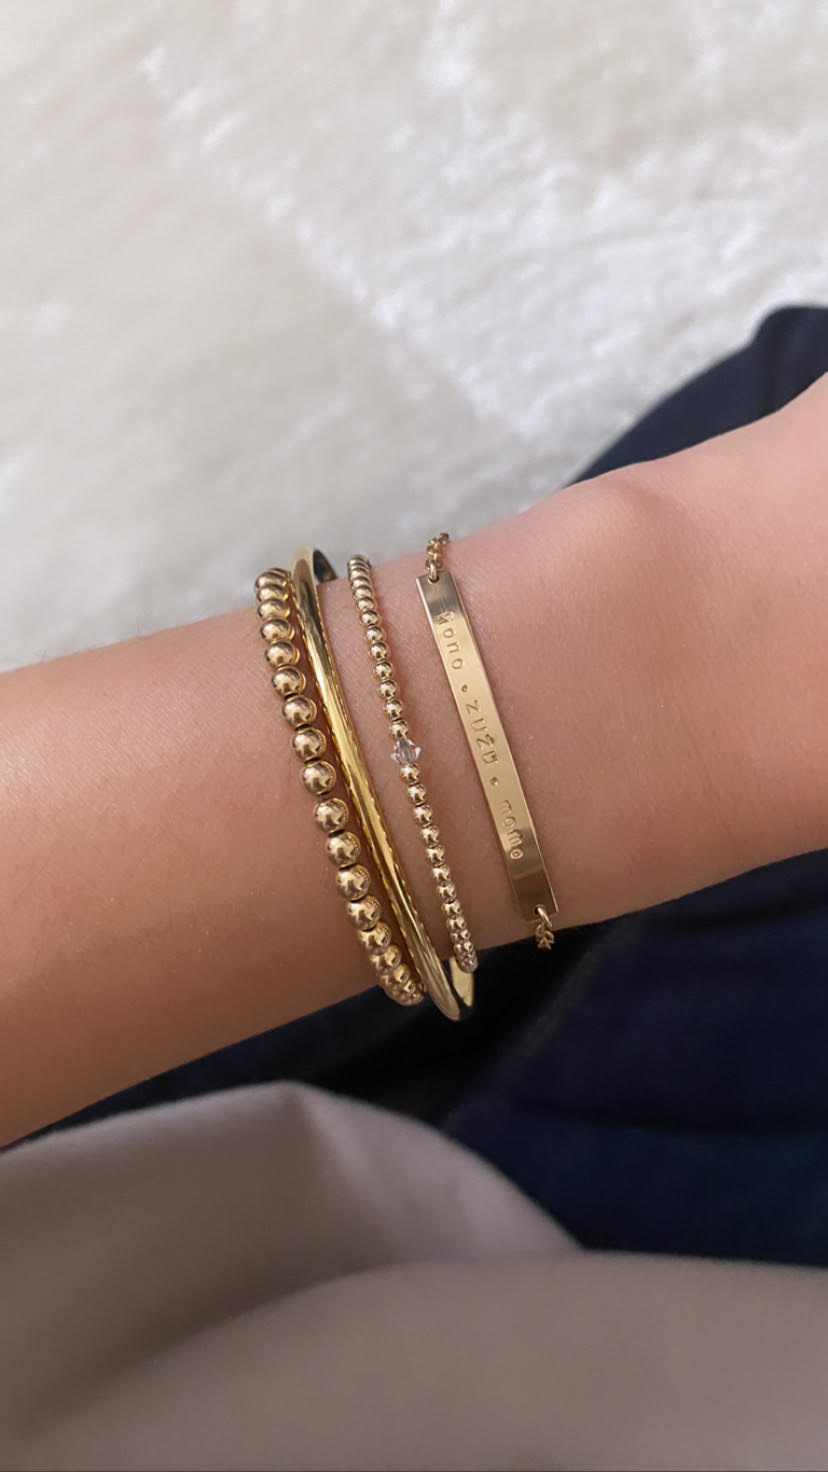 Thin Bar Bracelet - Customize - Personalize - Gold Filled